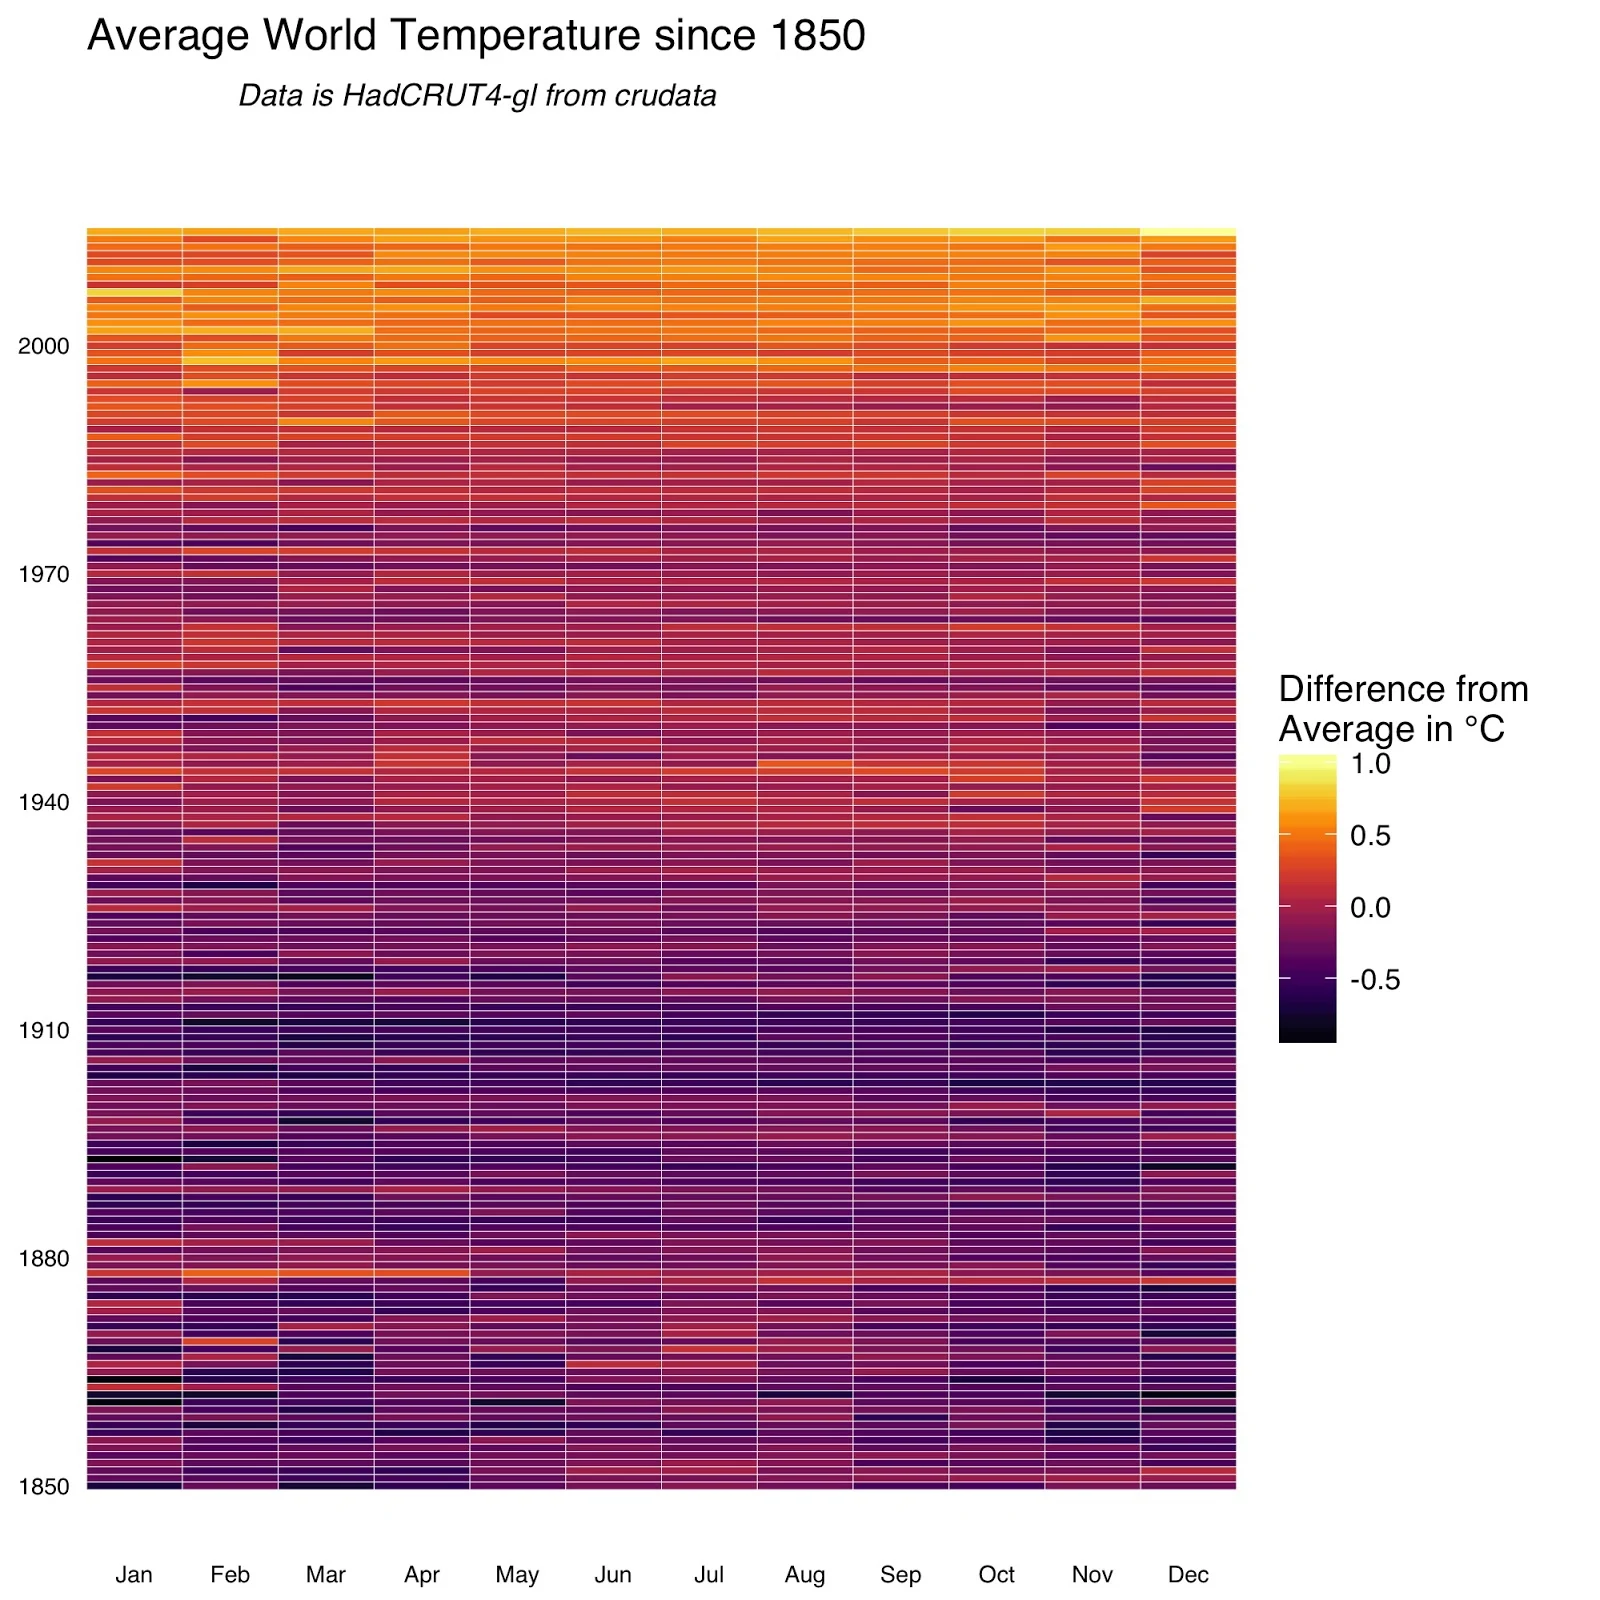 The Temperature of the World since 1850